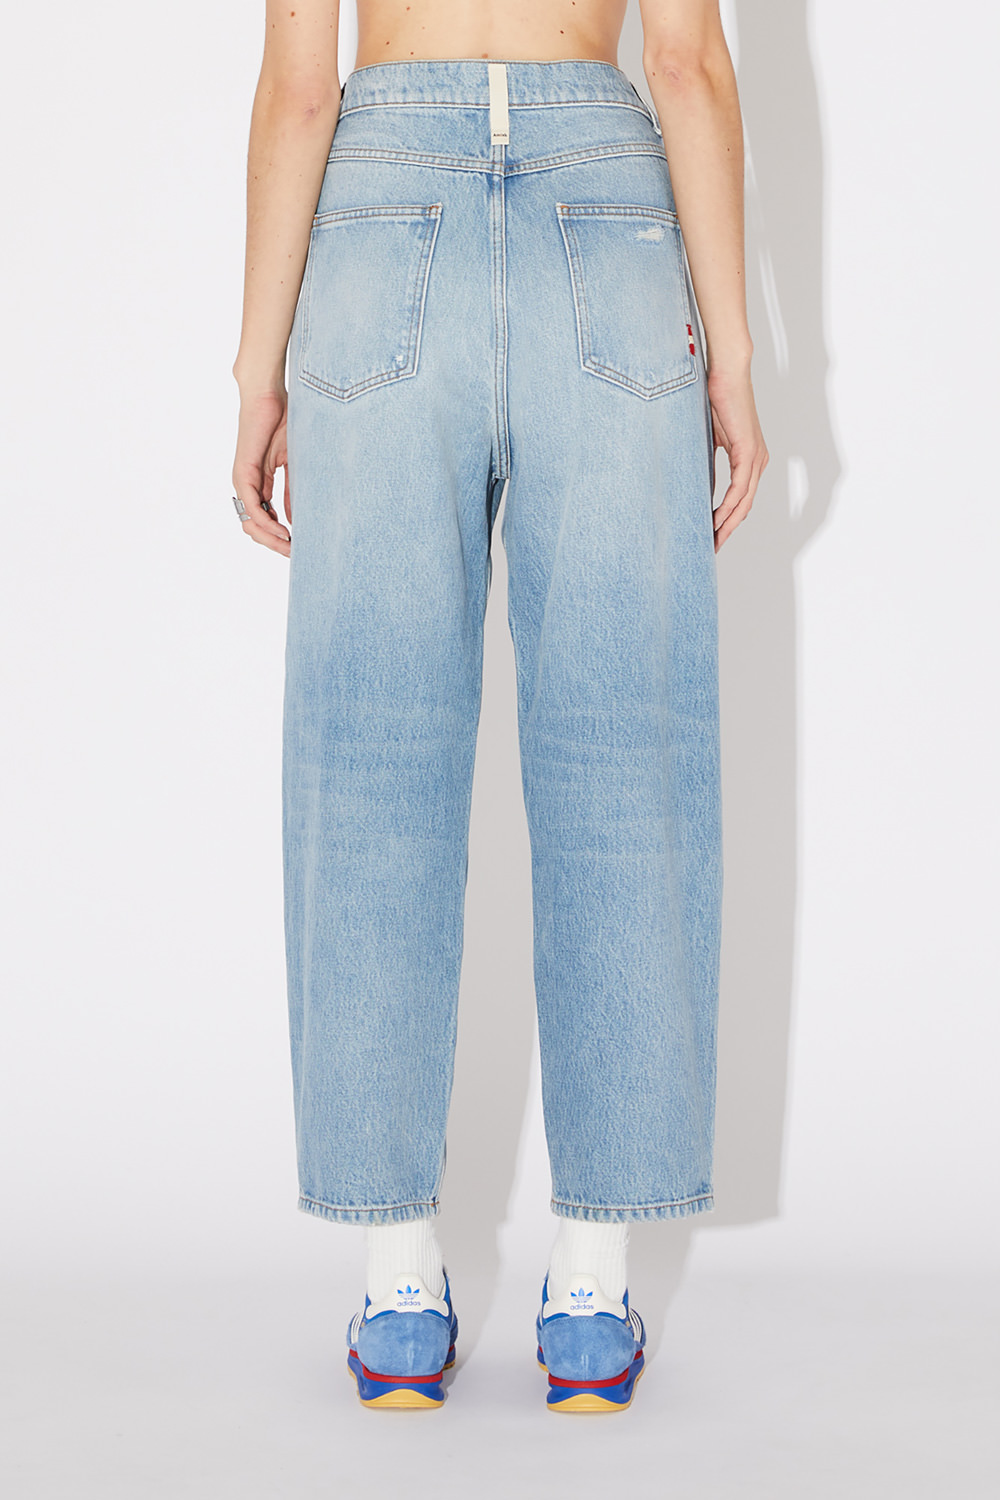 AMISH: JEANS BAGGY SUPER USED